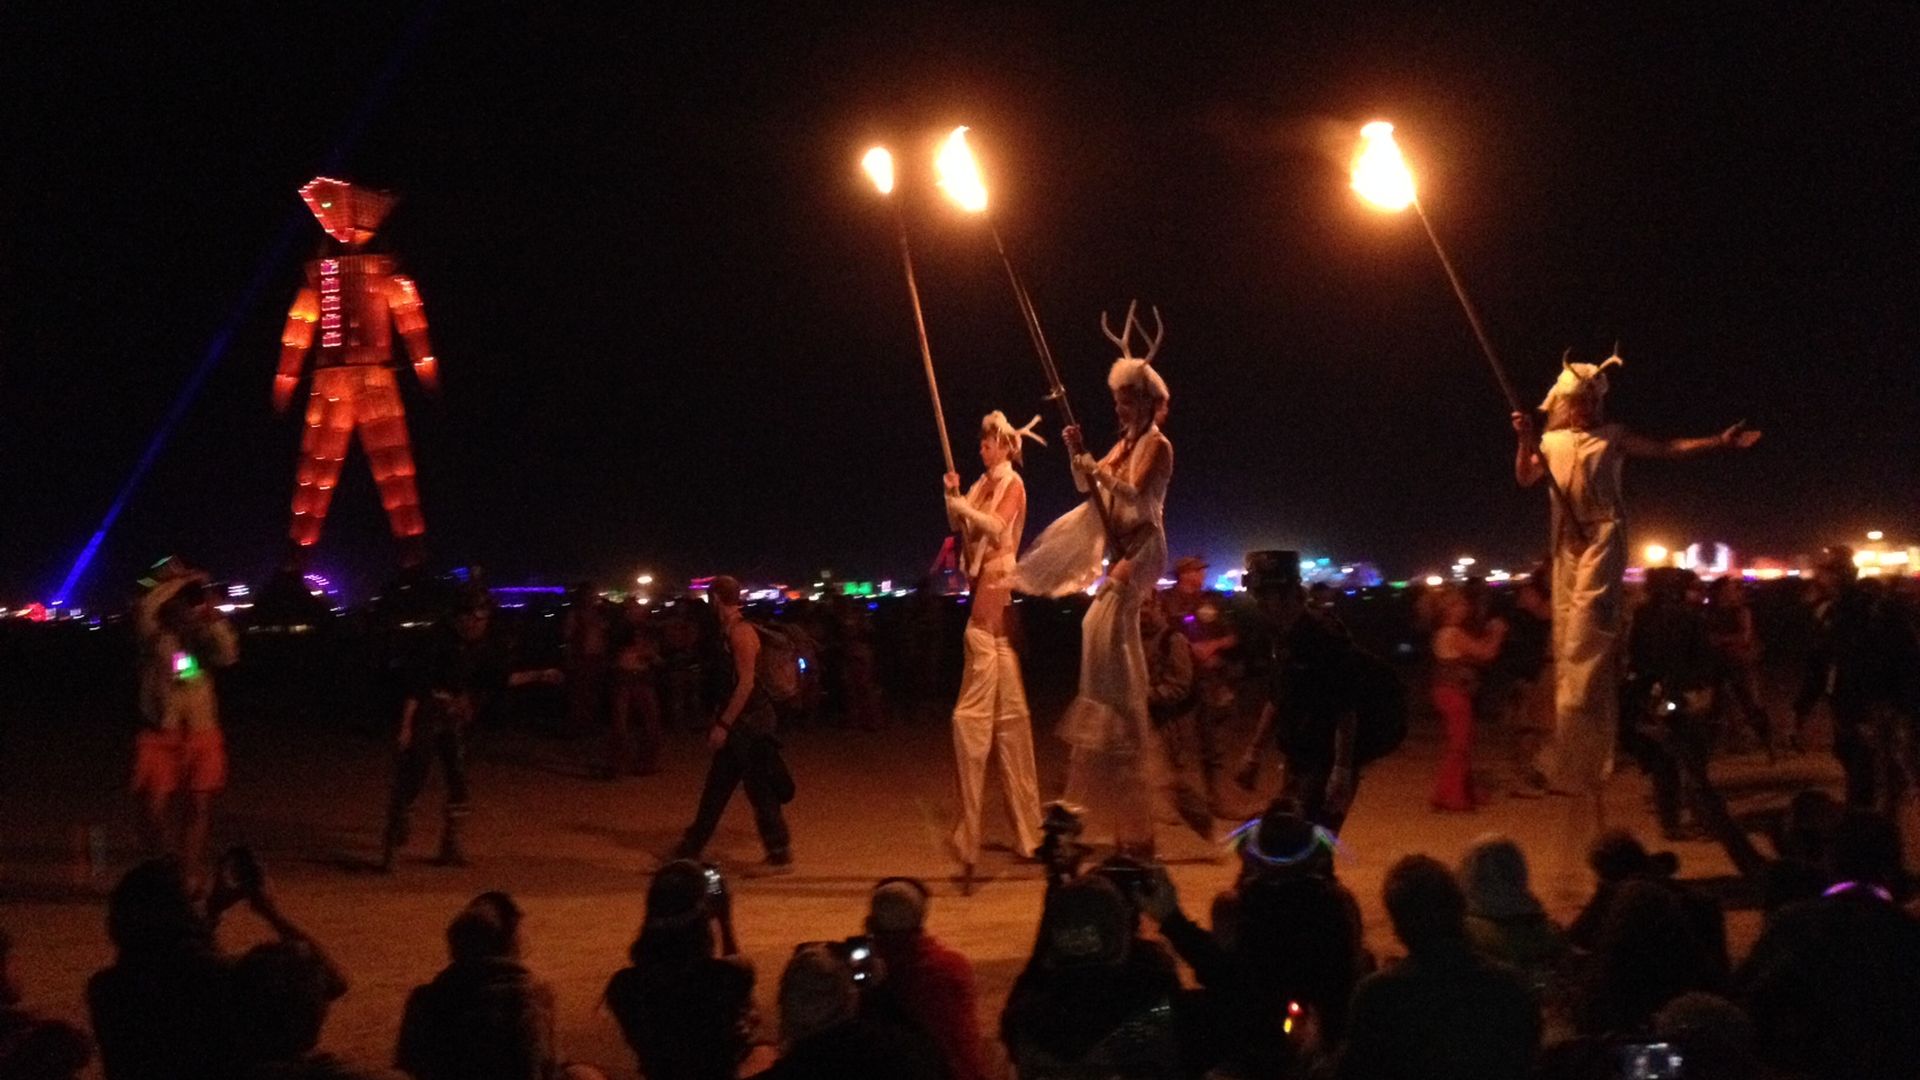 A parade of torch-bearers approaches an effigy of a man that's about to be set on fire at the Burning Man festival.